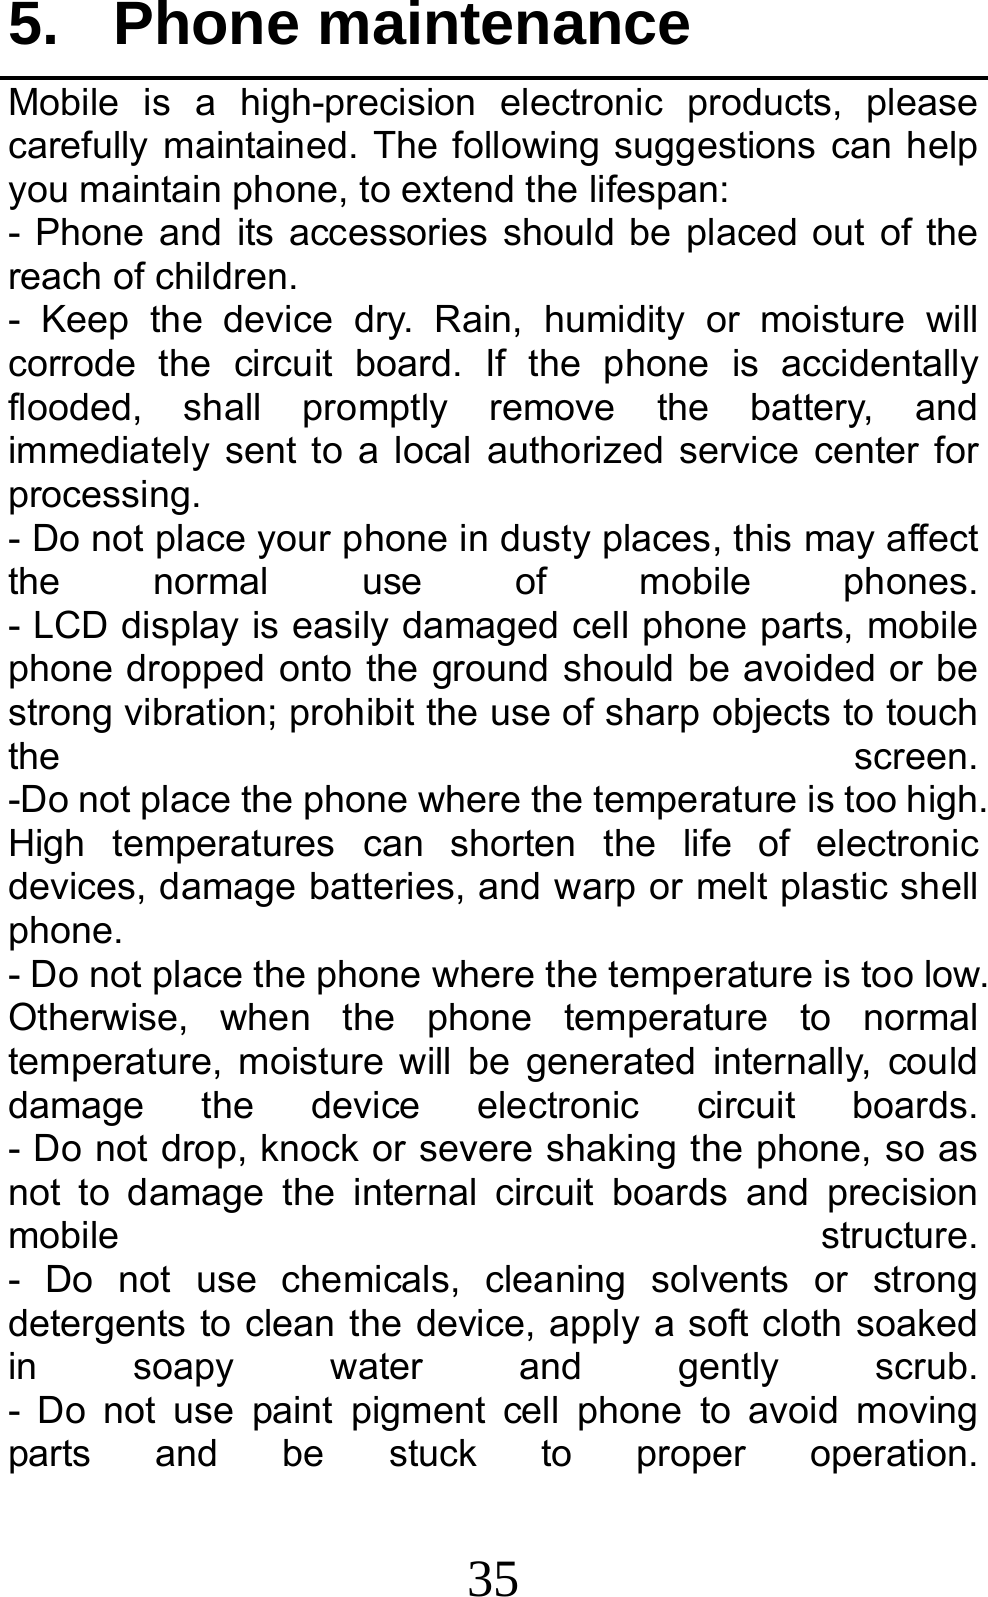 35 5. Phone maintenance Mobile is a high-precision electronic products, please carefully maintained. The following suggestions can help you maintain phone, to extend the lifespan: - Phone and its accessories should be placed out of the reach of children.              - Keep the device dry. Rain, humidity or moisture will corrode the circuit board. If the phone is accidentally flooded, shall promptly remove the battery, and immediately sent to a local authorized service center for processing.        - Do not place your phone in dusty places, this may affect the  normal  use  of  mobile  phones.         - LCD display is easily damaged cell phone parts, mobile phone dropped onto the ground should be avoided or be strong vibration; prohibit the use of sharp objects to touch the  screen.         -Do not place the phone where the temperature is too high. High temperatures can shorten the life of electronic devices, damage batteries, and warp or melt plastic shell phone.                                                    - Do not place the phone where the temperature is too low. Otherwise, when the phone temperature to normal temperature, moisture will be generated internally, could damage  the  device  electronic  circuit  boards.         - Do not drop, knock or severe shaking the phone, so as not to damage the internal circuit boards and precision mobile  structure.         - Do not use chemicals, cleaning solvents or strong detergents to clean the device, apply a soft cloth soaked in soapy water and gently scrub.         - Do not use paint pigment cell phone to avoid moving parts  and  be  stuck  to  proper  operation.         